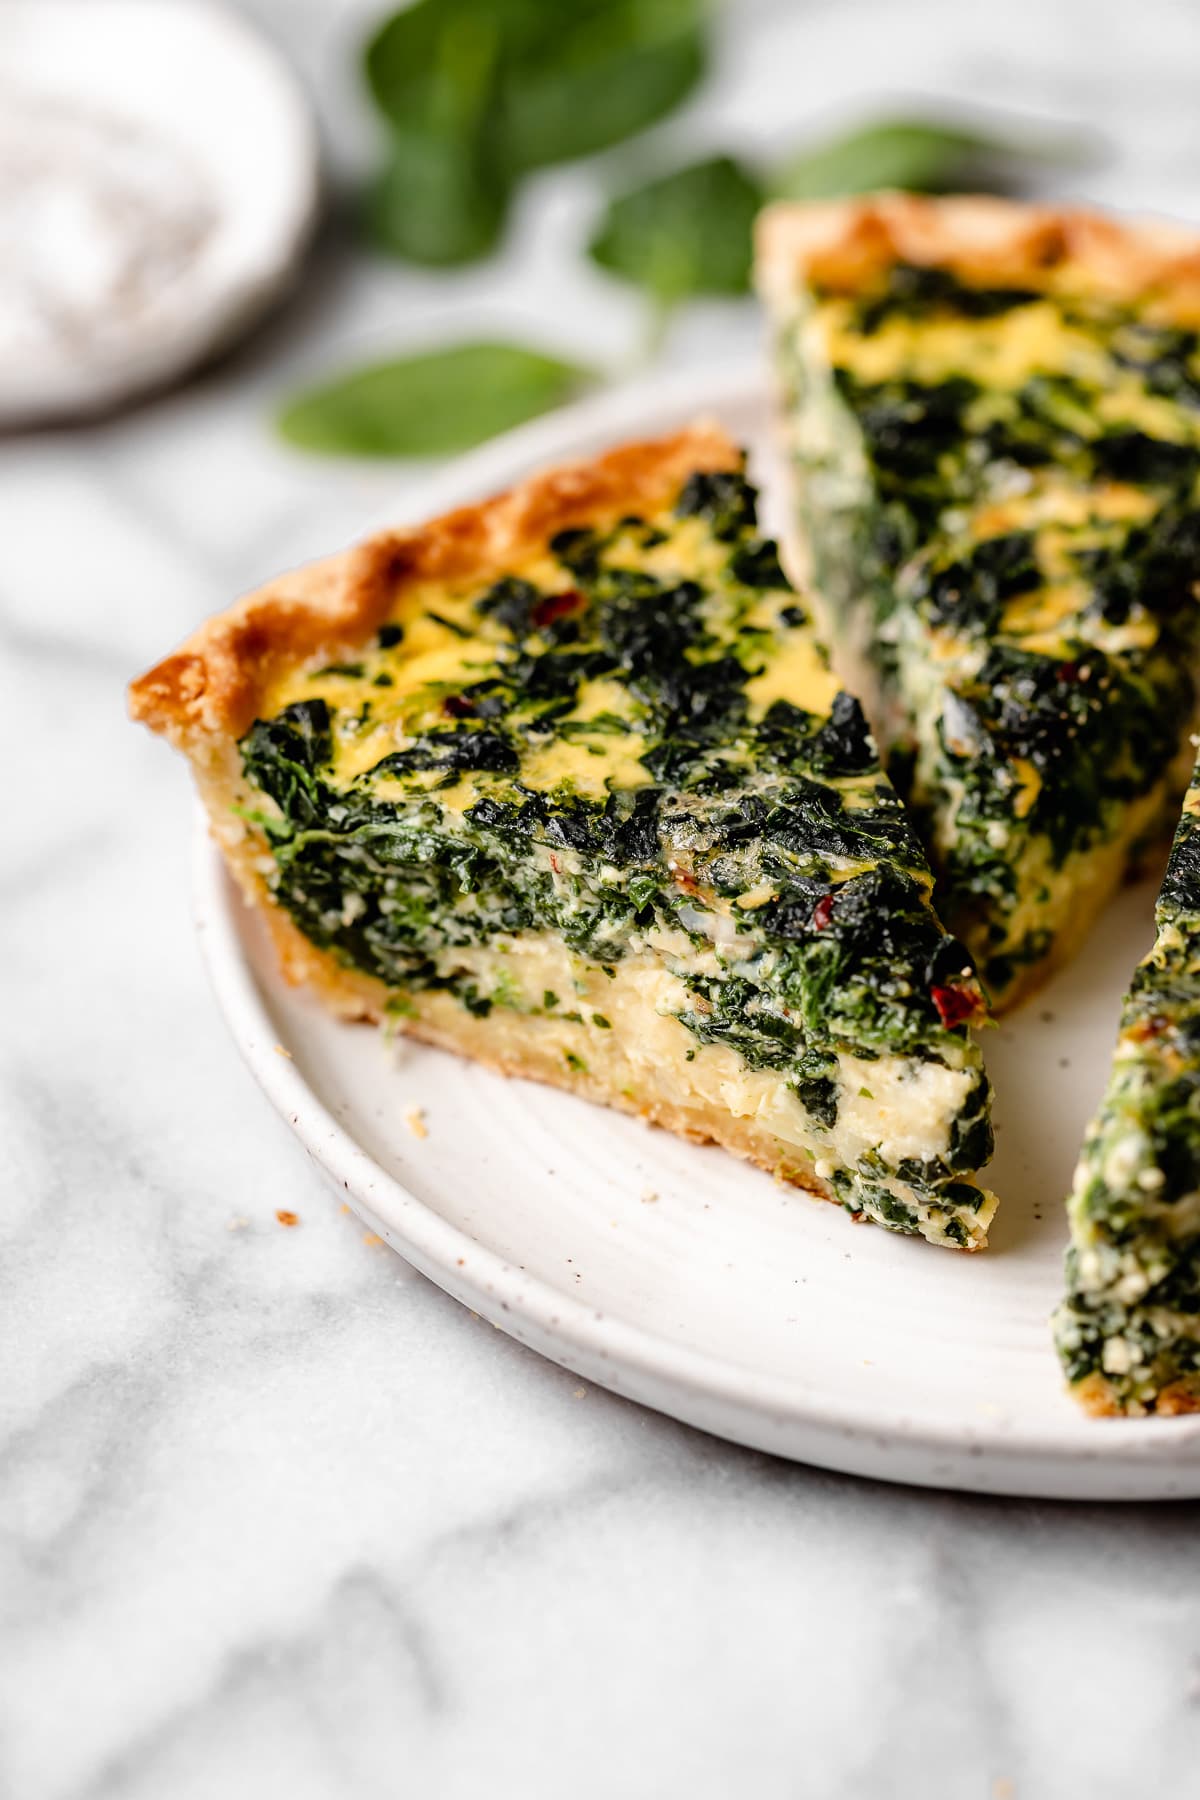 spinach quiche cut into pieces on plate.